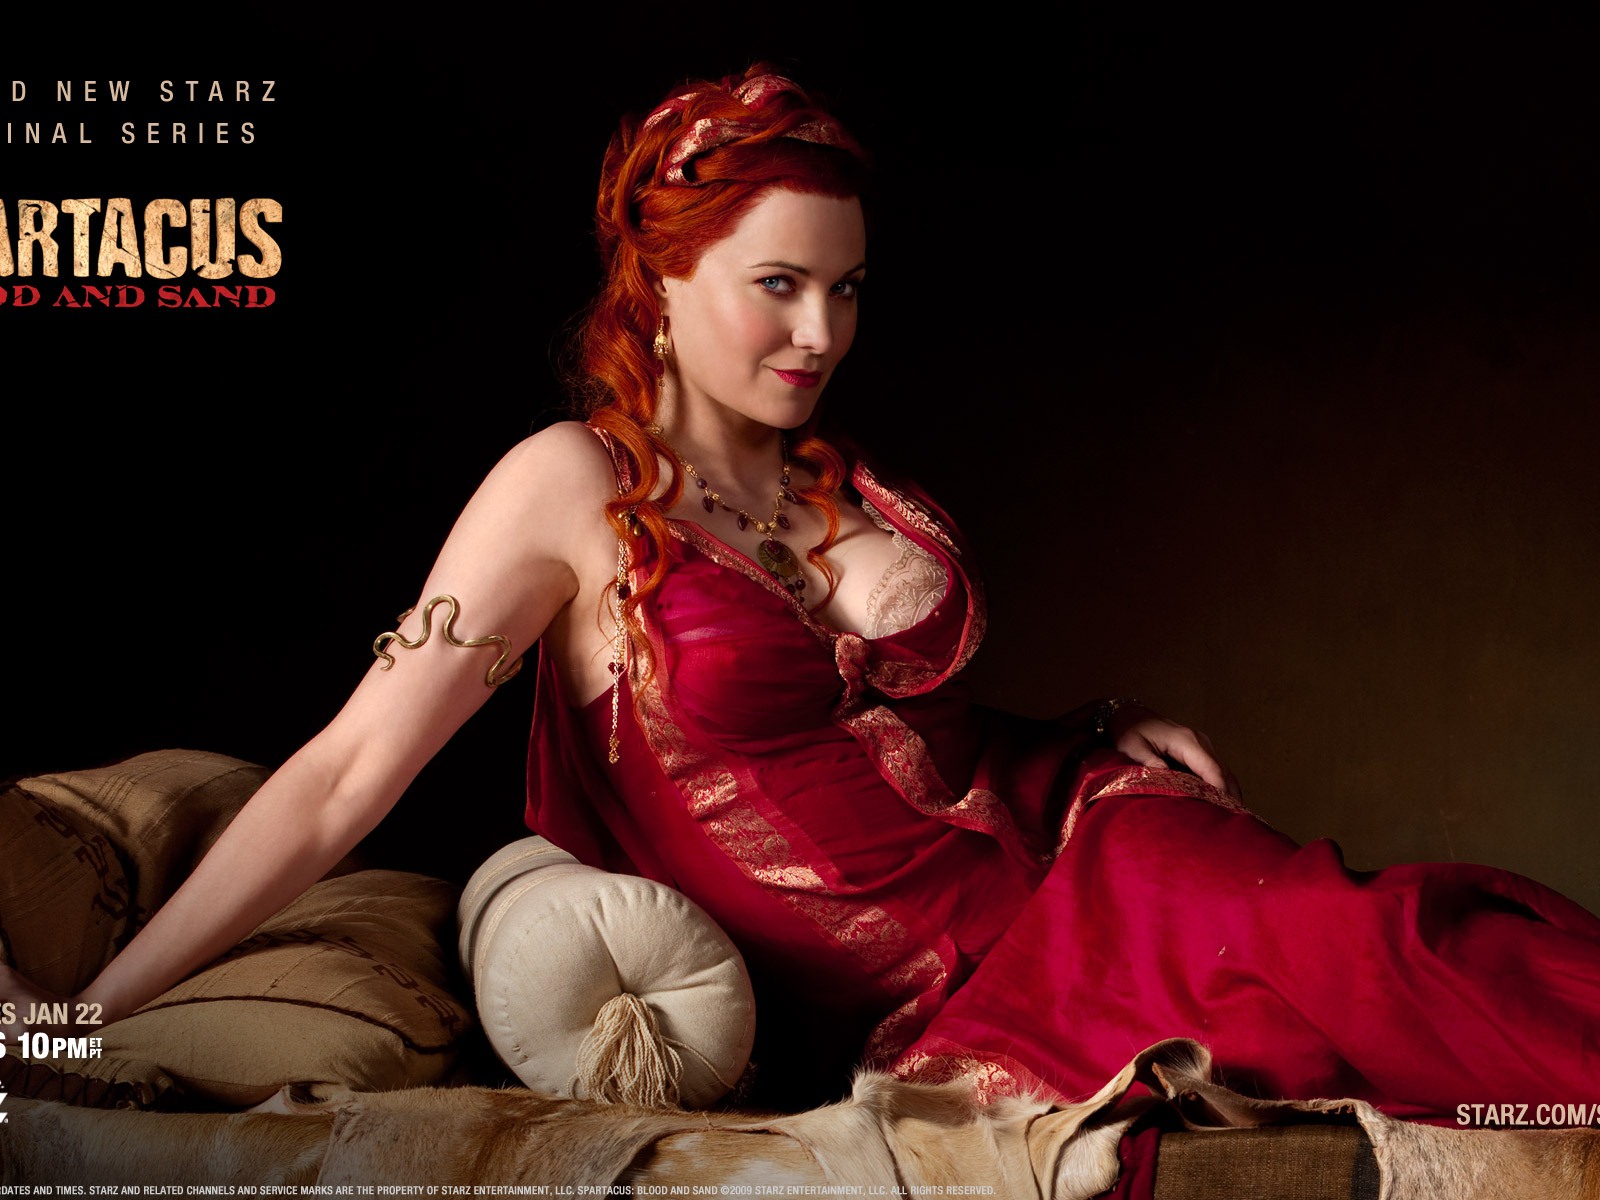 Spartacus: Blood and Sand HD Wallpaper #6 - 1600x1200